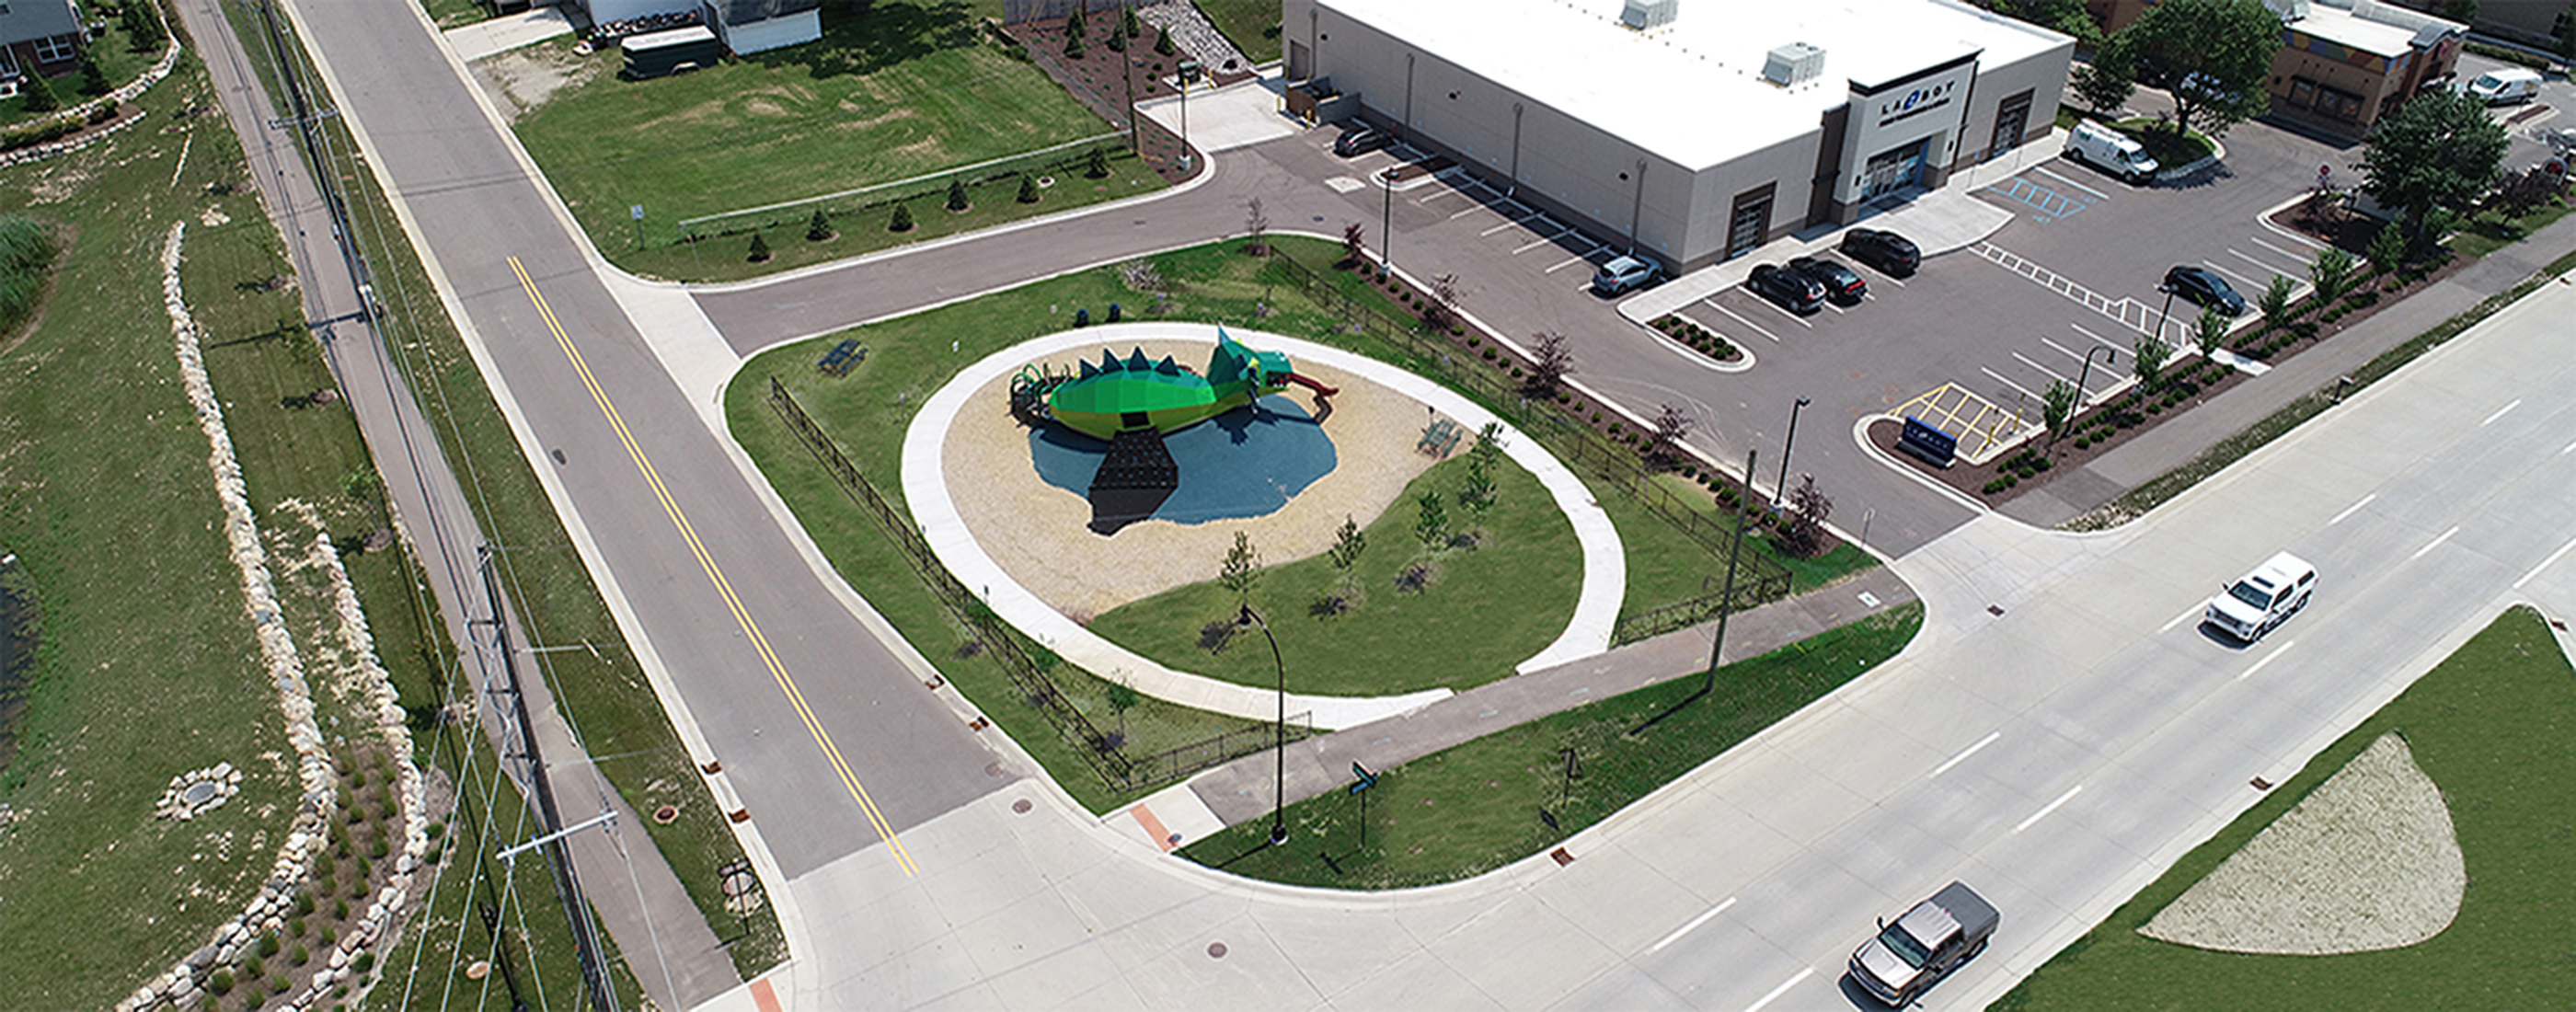 Birdseye view of the new dragon themed pocket park located on Baldwin Road in Lake Orion, MI